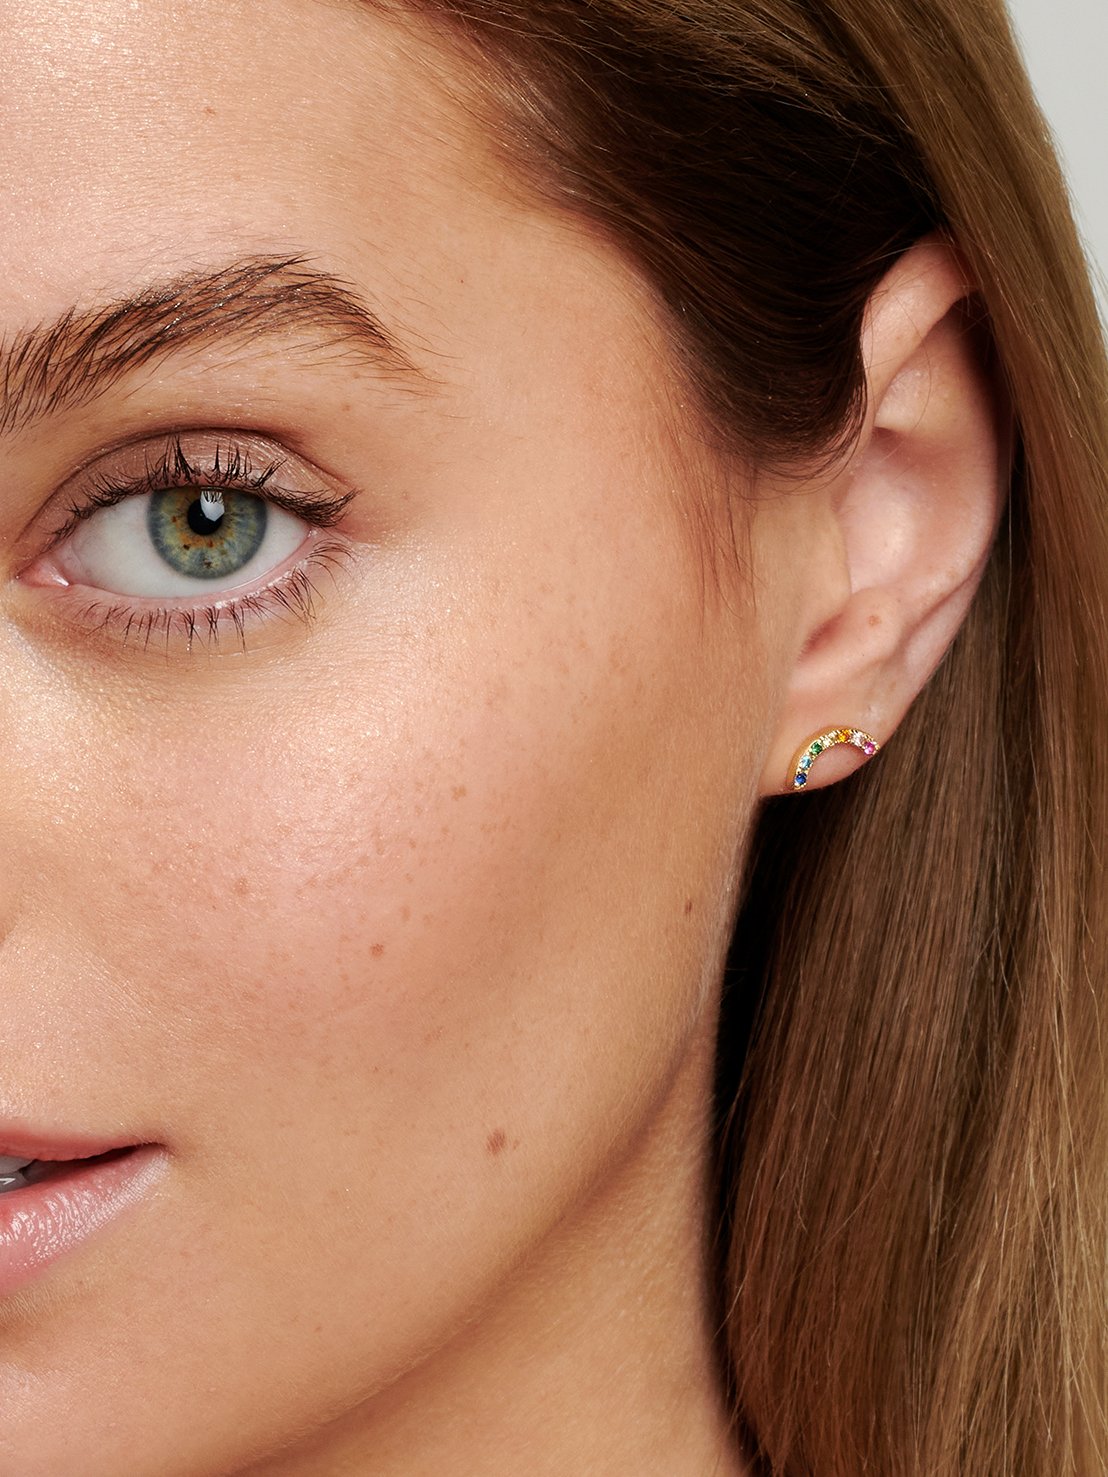 Teenage model wearing gold rainbow shaped stud earrings with colourful stones.